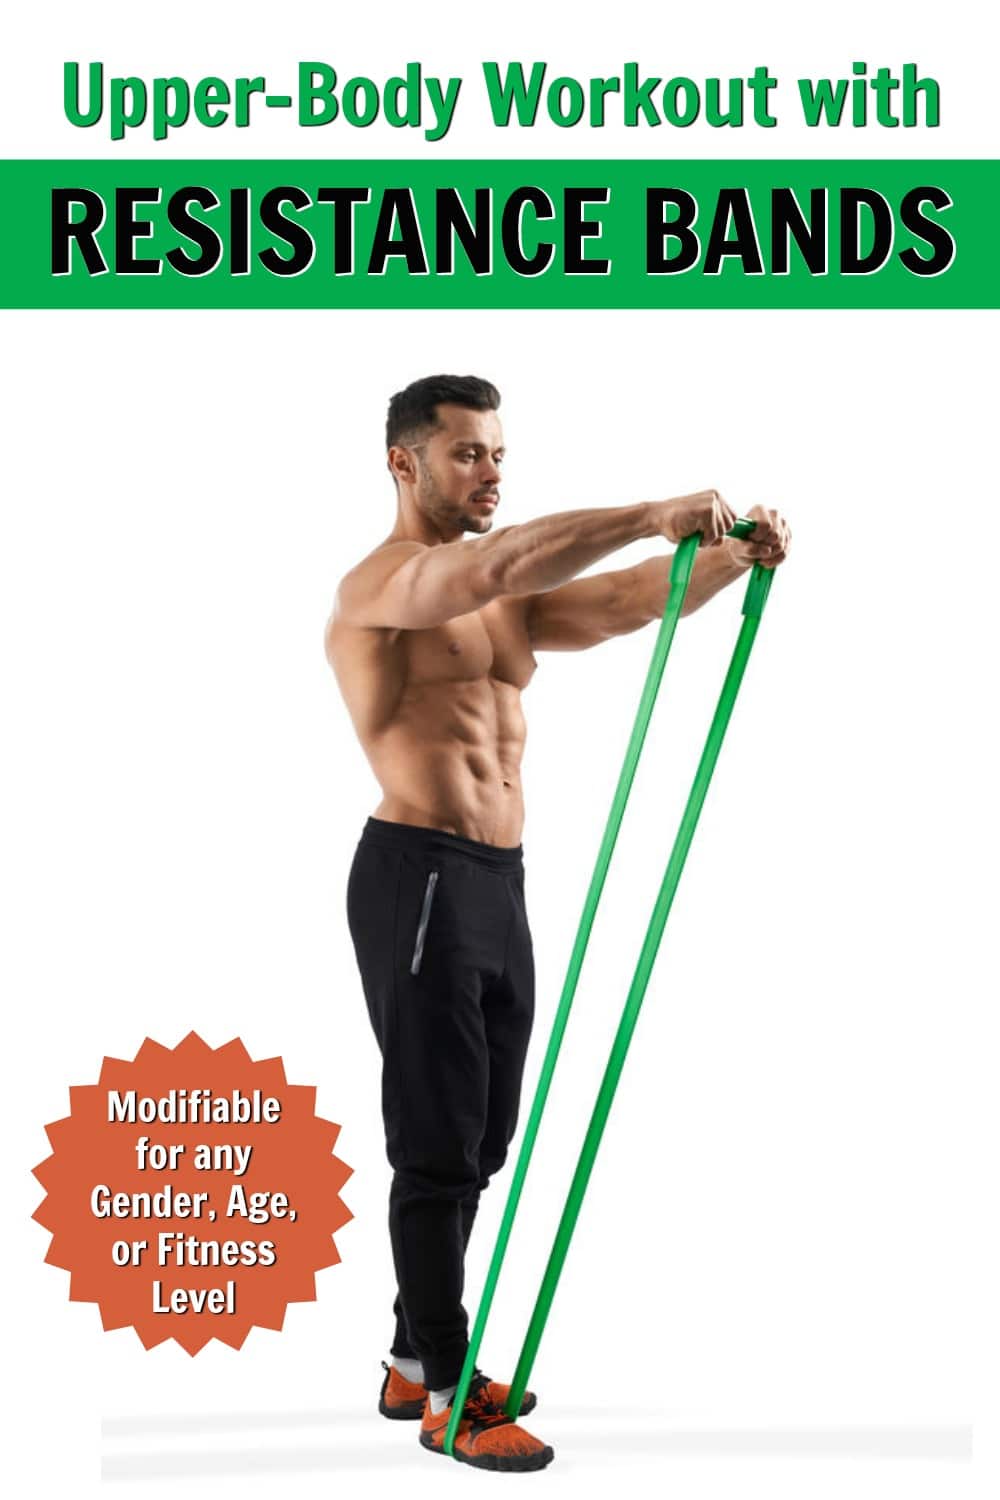 Resistance Band Workout for Upper Body • [Guide and Video]